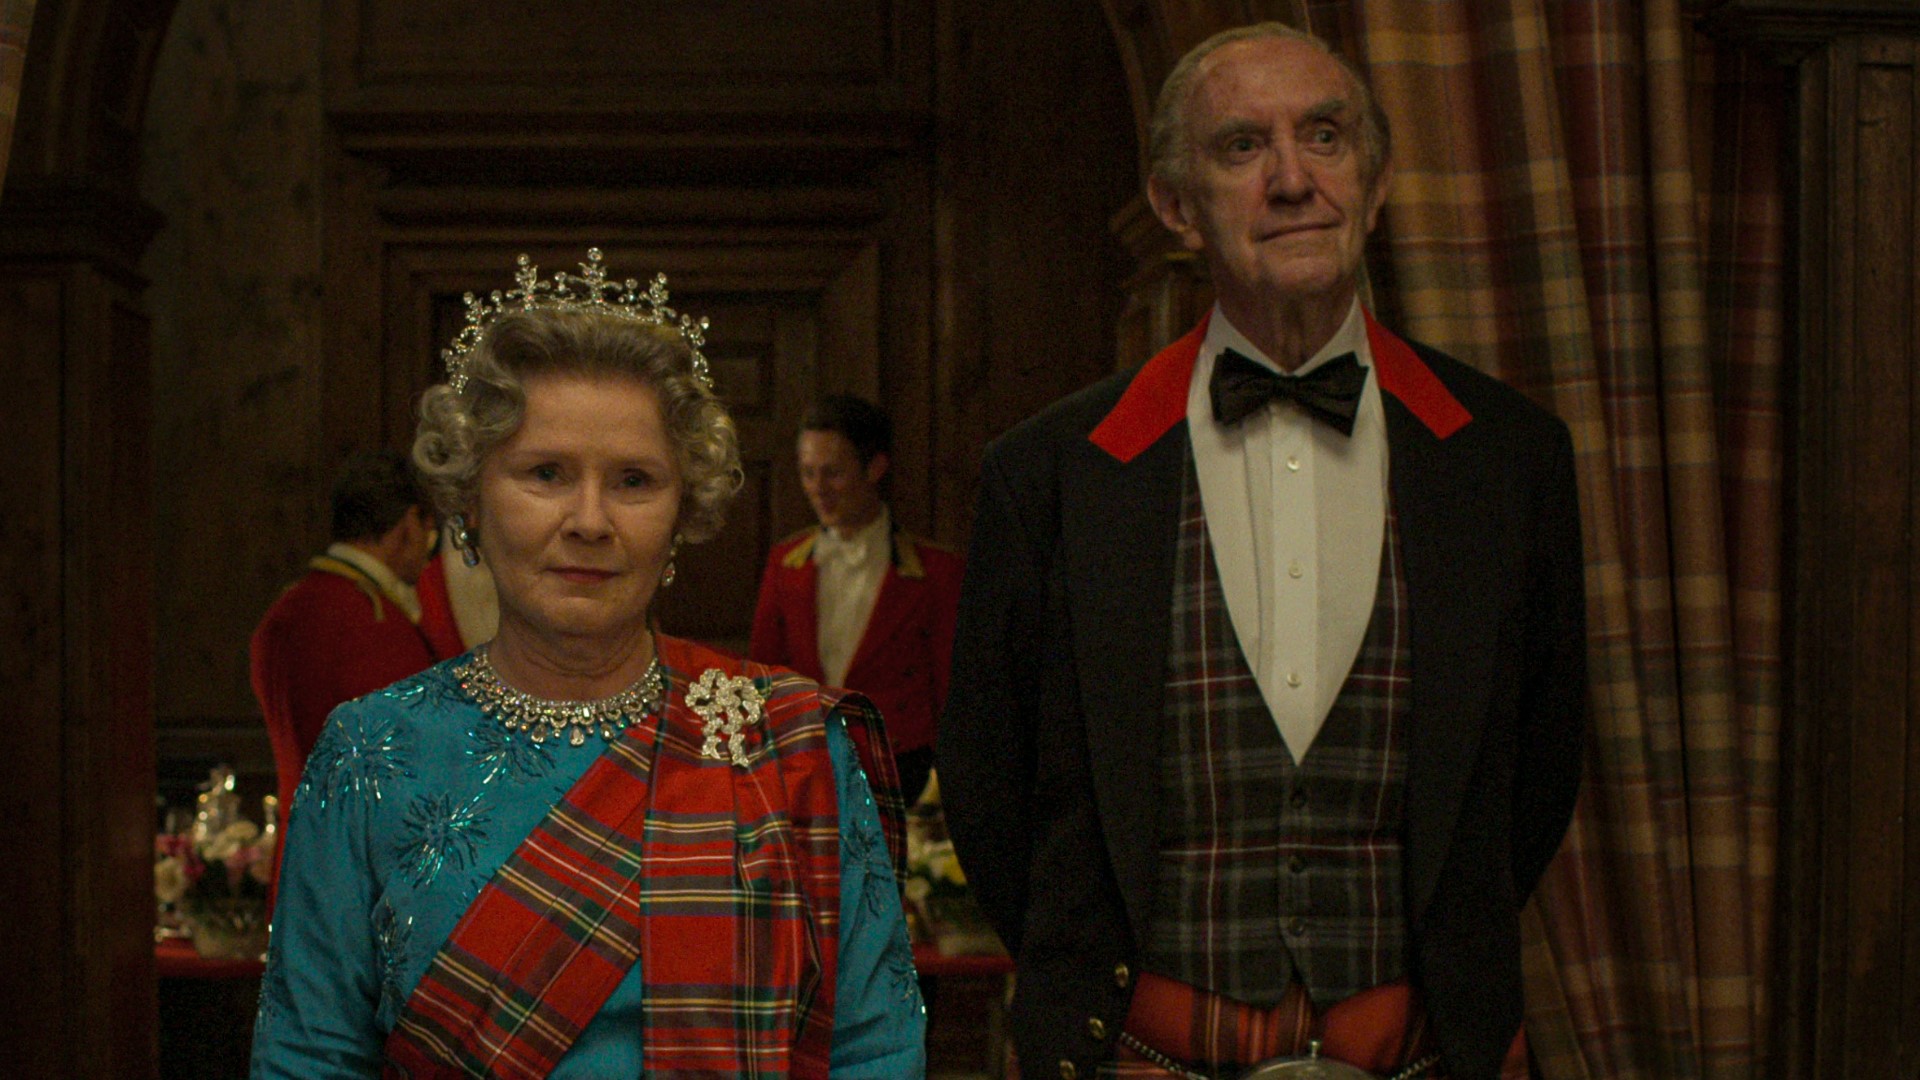 Imelda Staunton, Jonathan Pryce, and Lesley Manville star as Queen Elizabeth, Prince Philip, and Princess Margaret in Season 5 of the hit Netflix show. #k5evening